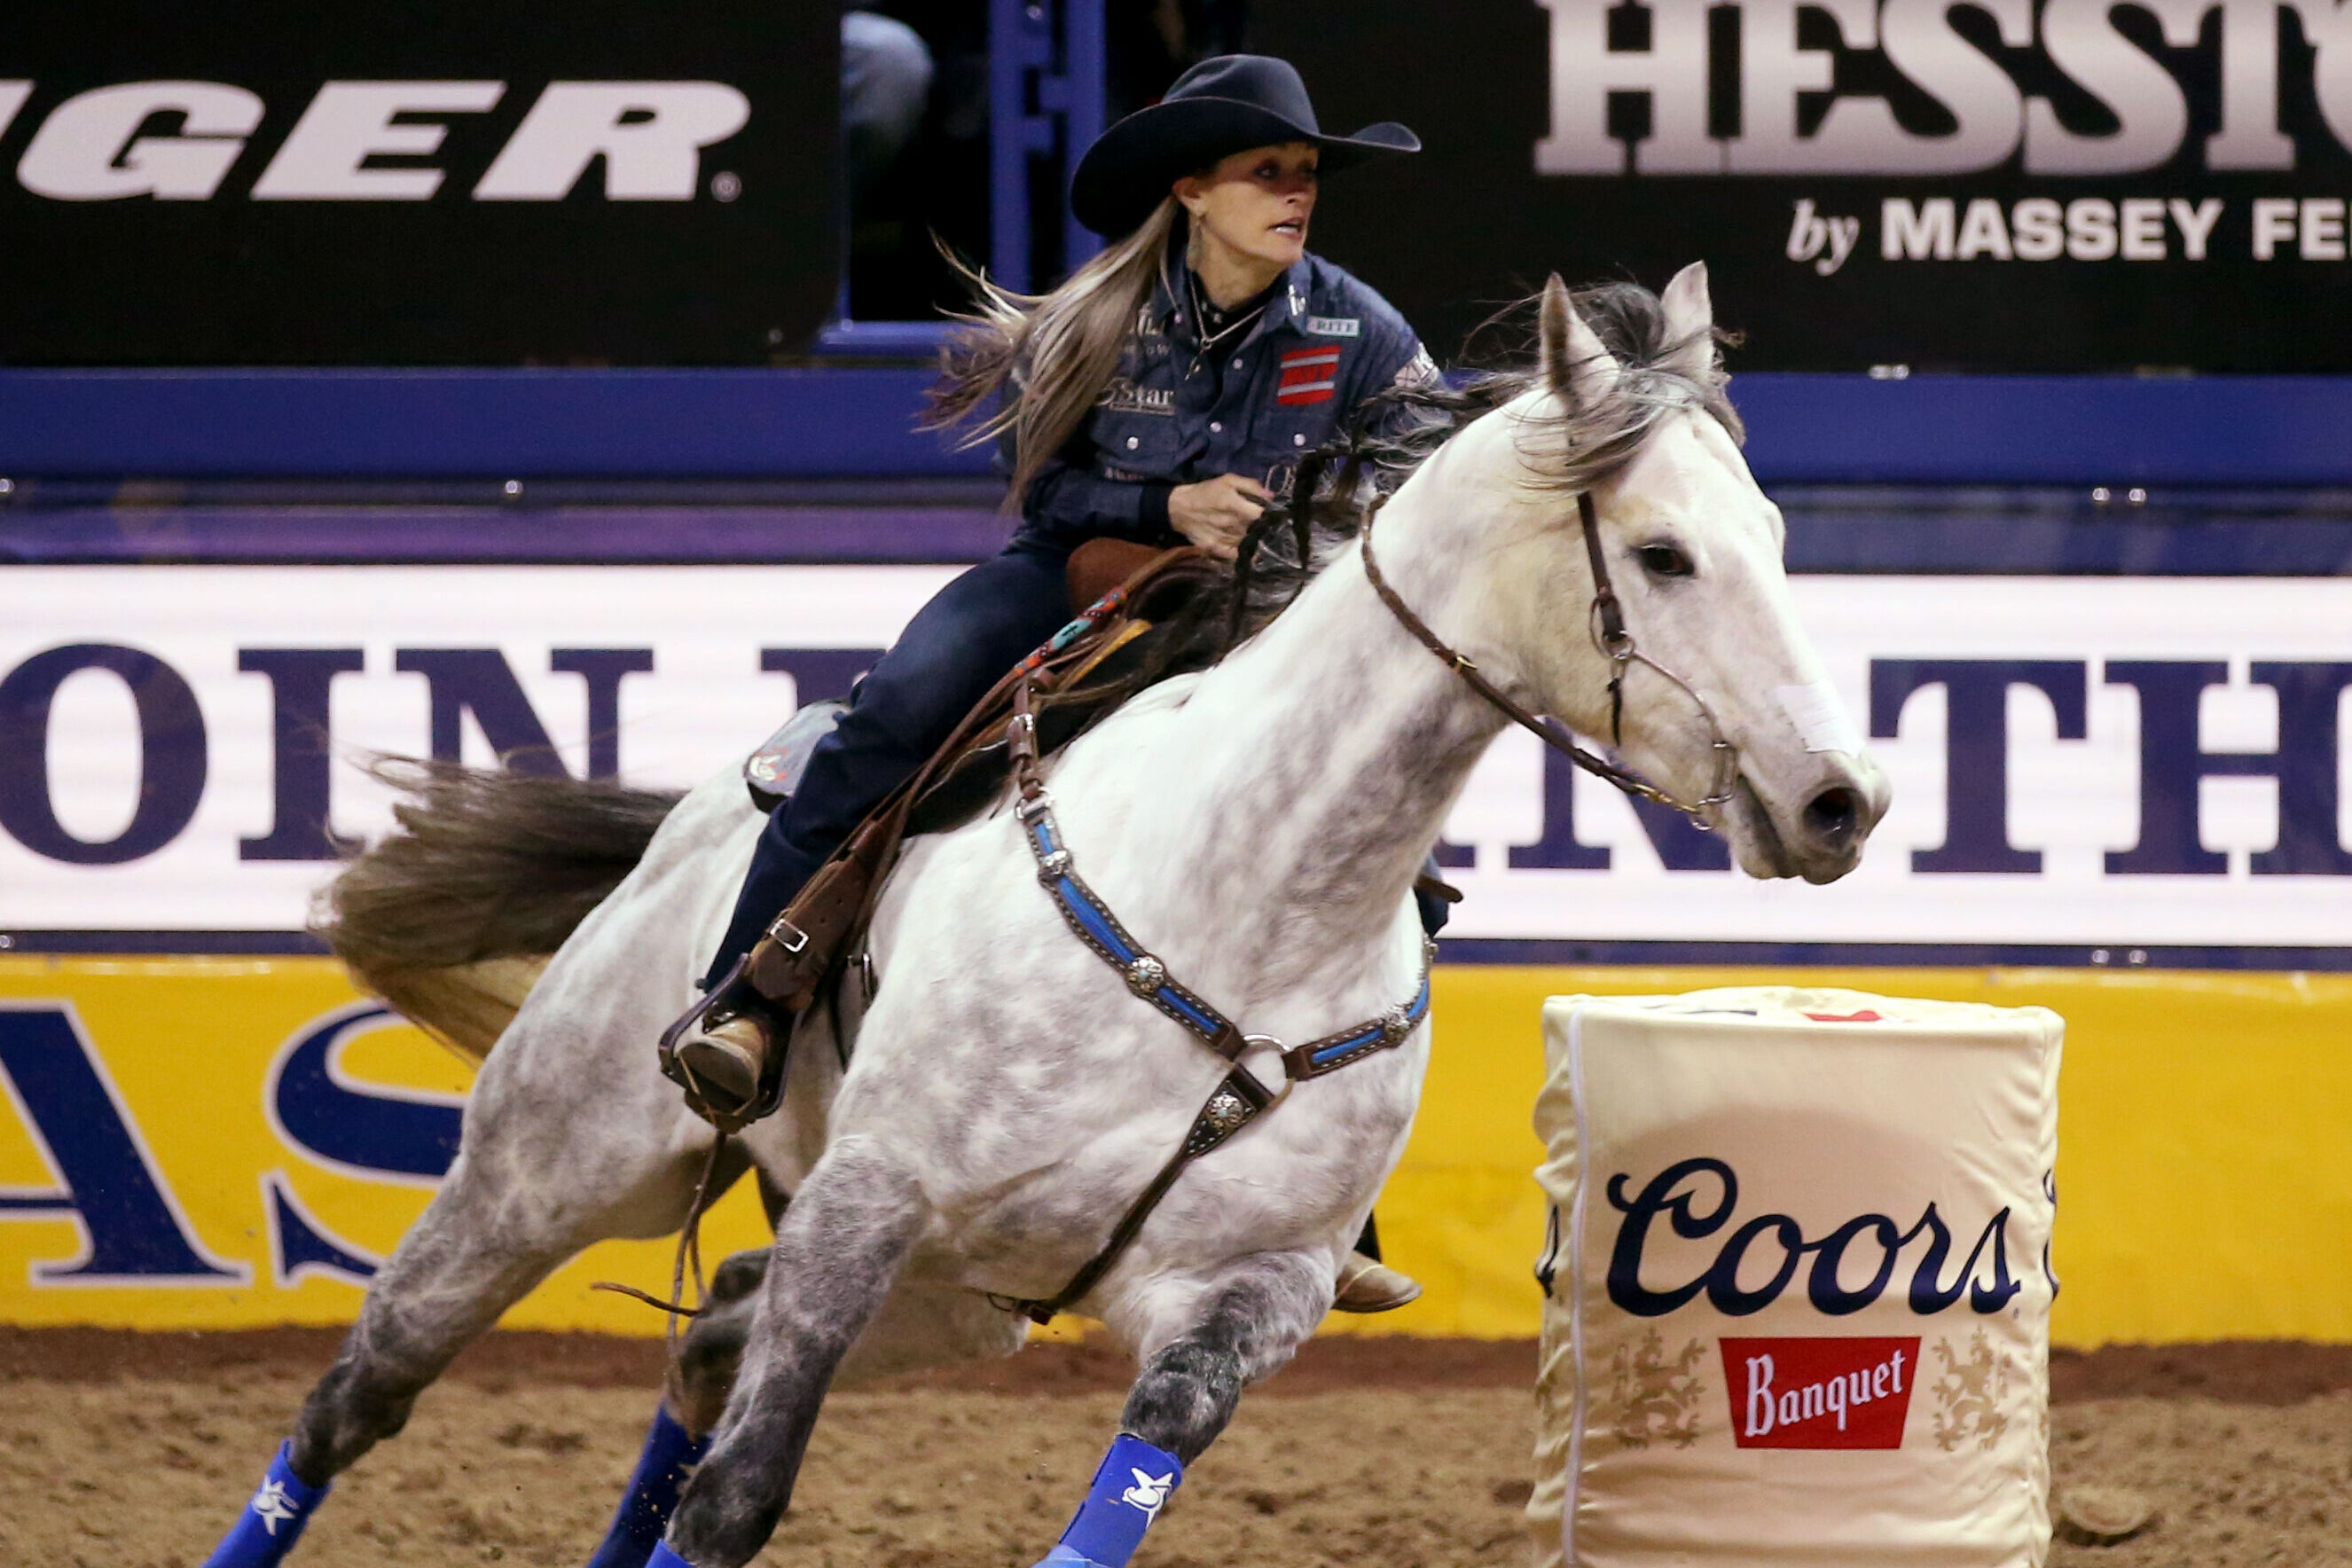 Barrel racer Stevi Hillman, who is ranked eighth in the world